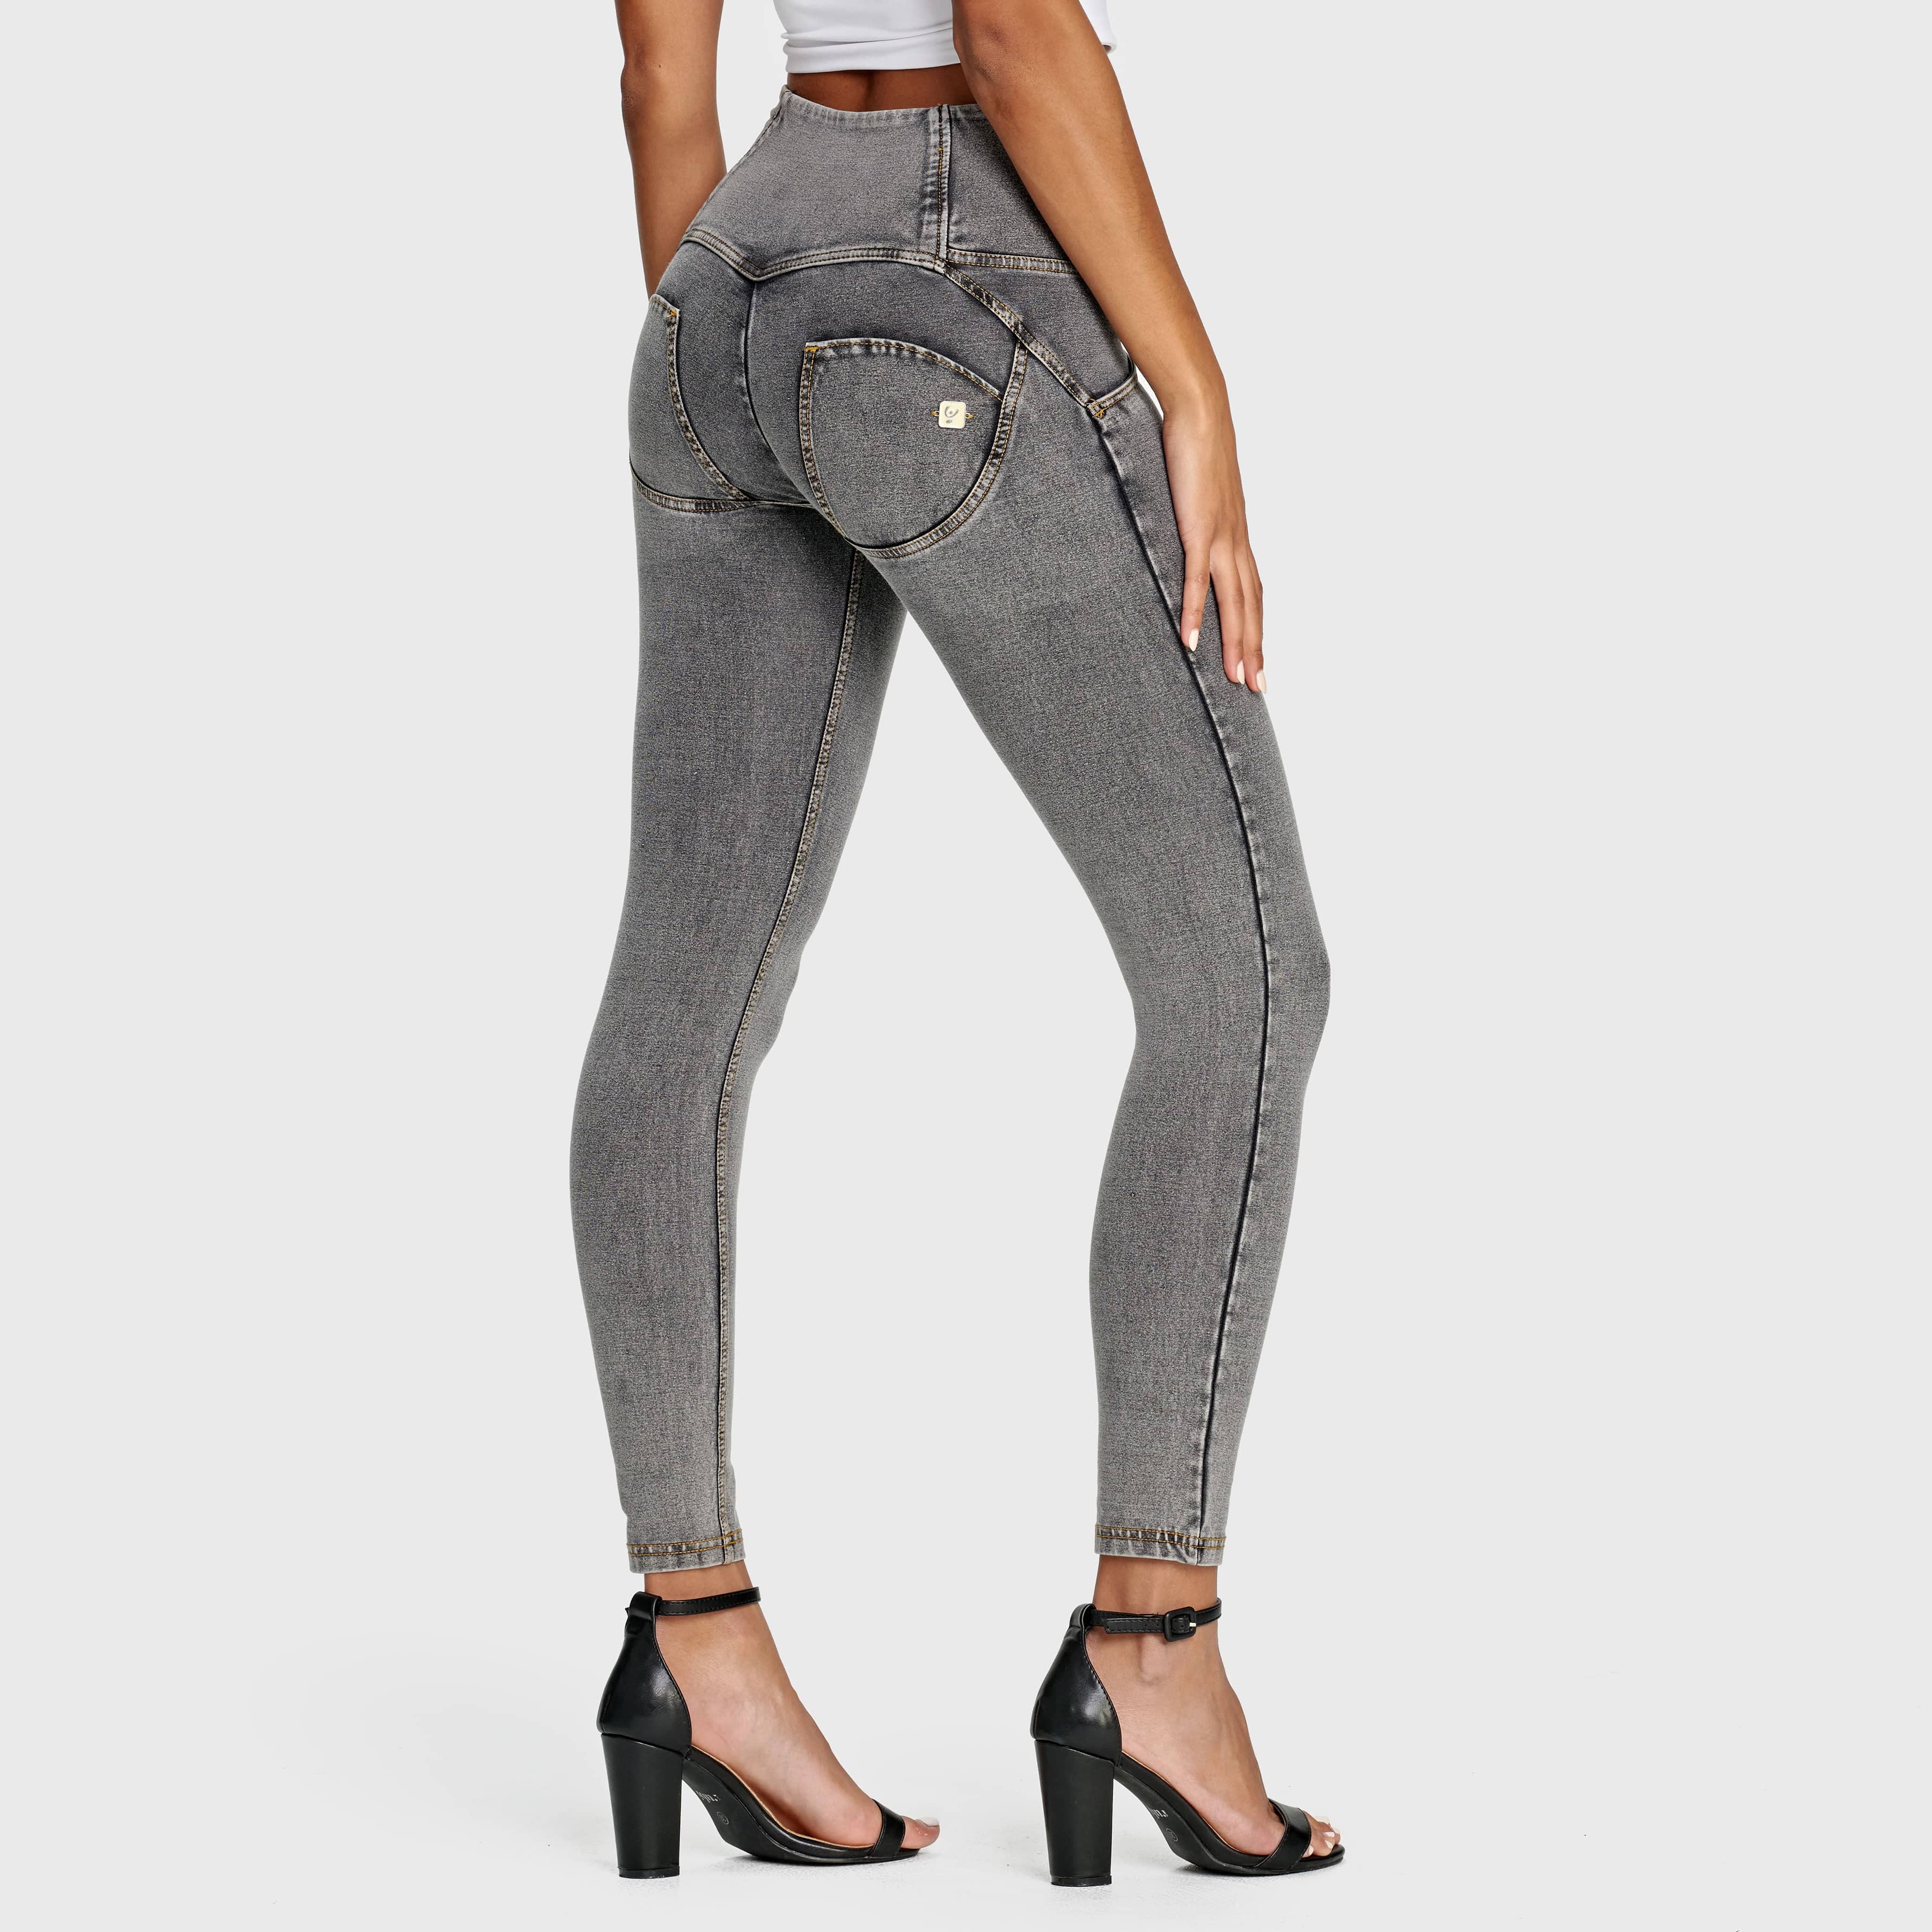 WR.UP® Denim - 3 Button High Waisted - Petite Length - Grey + Yellow Stitching 2